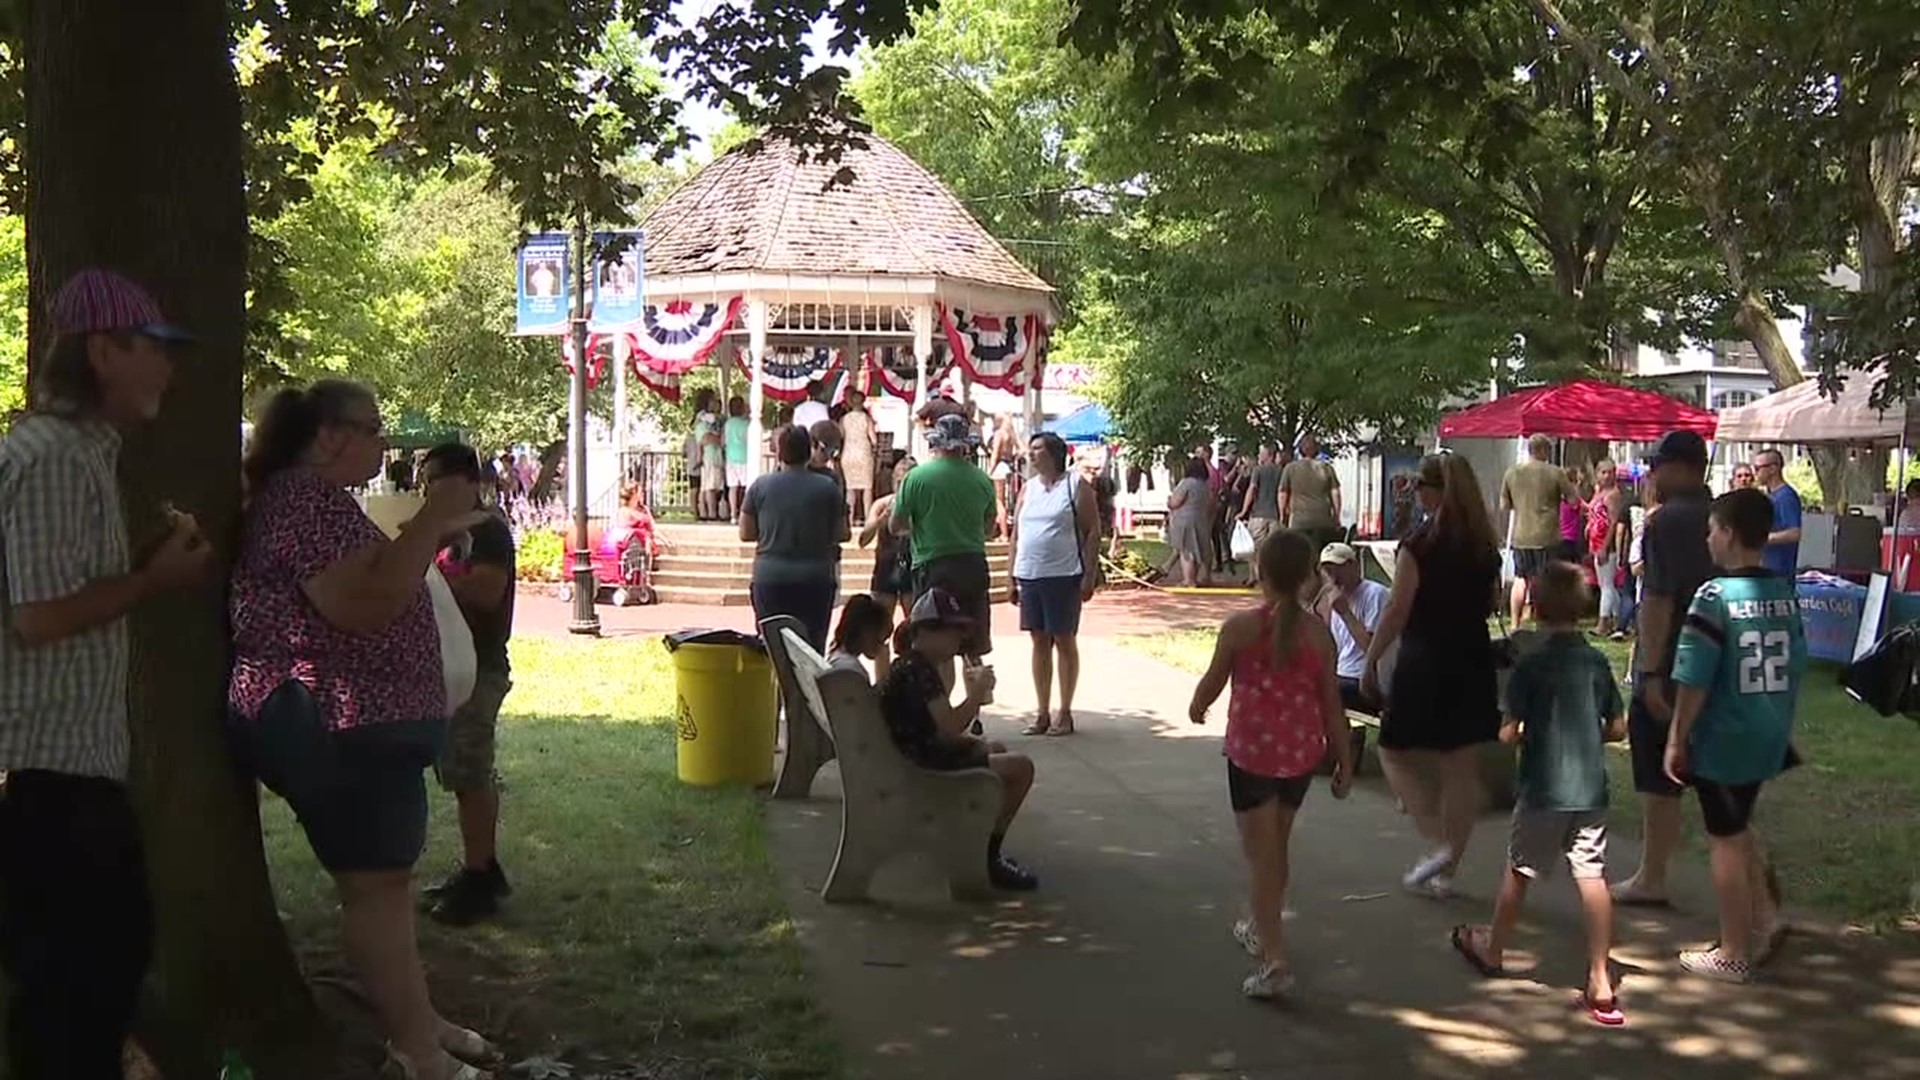 A longtime summer tradition is taking place this week in Northumberland.  Pineknotter Days are back after taking a year off because of the COVID-19 pandemic.